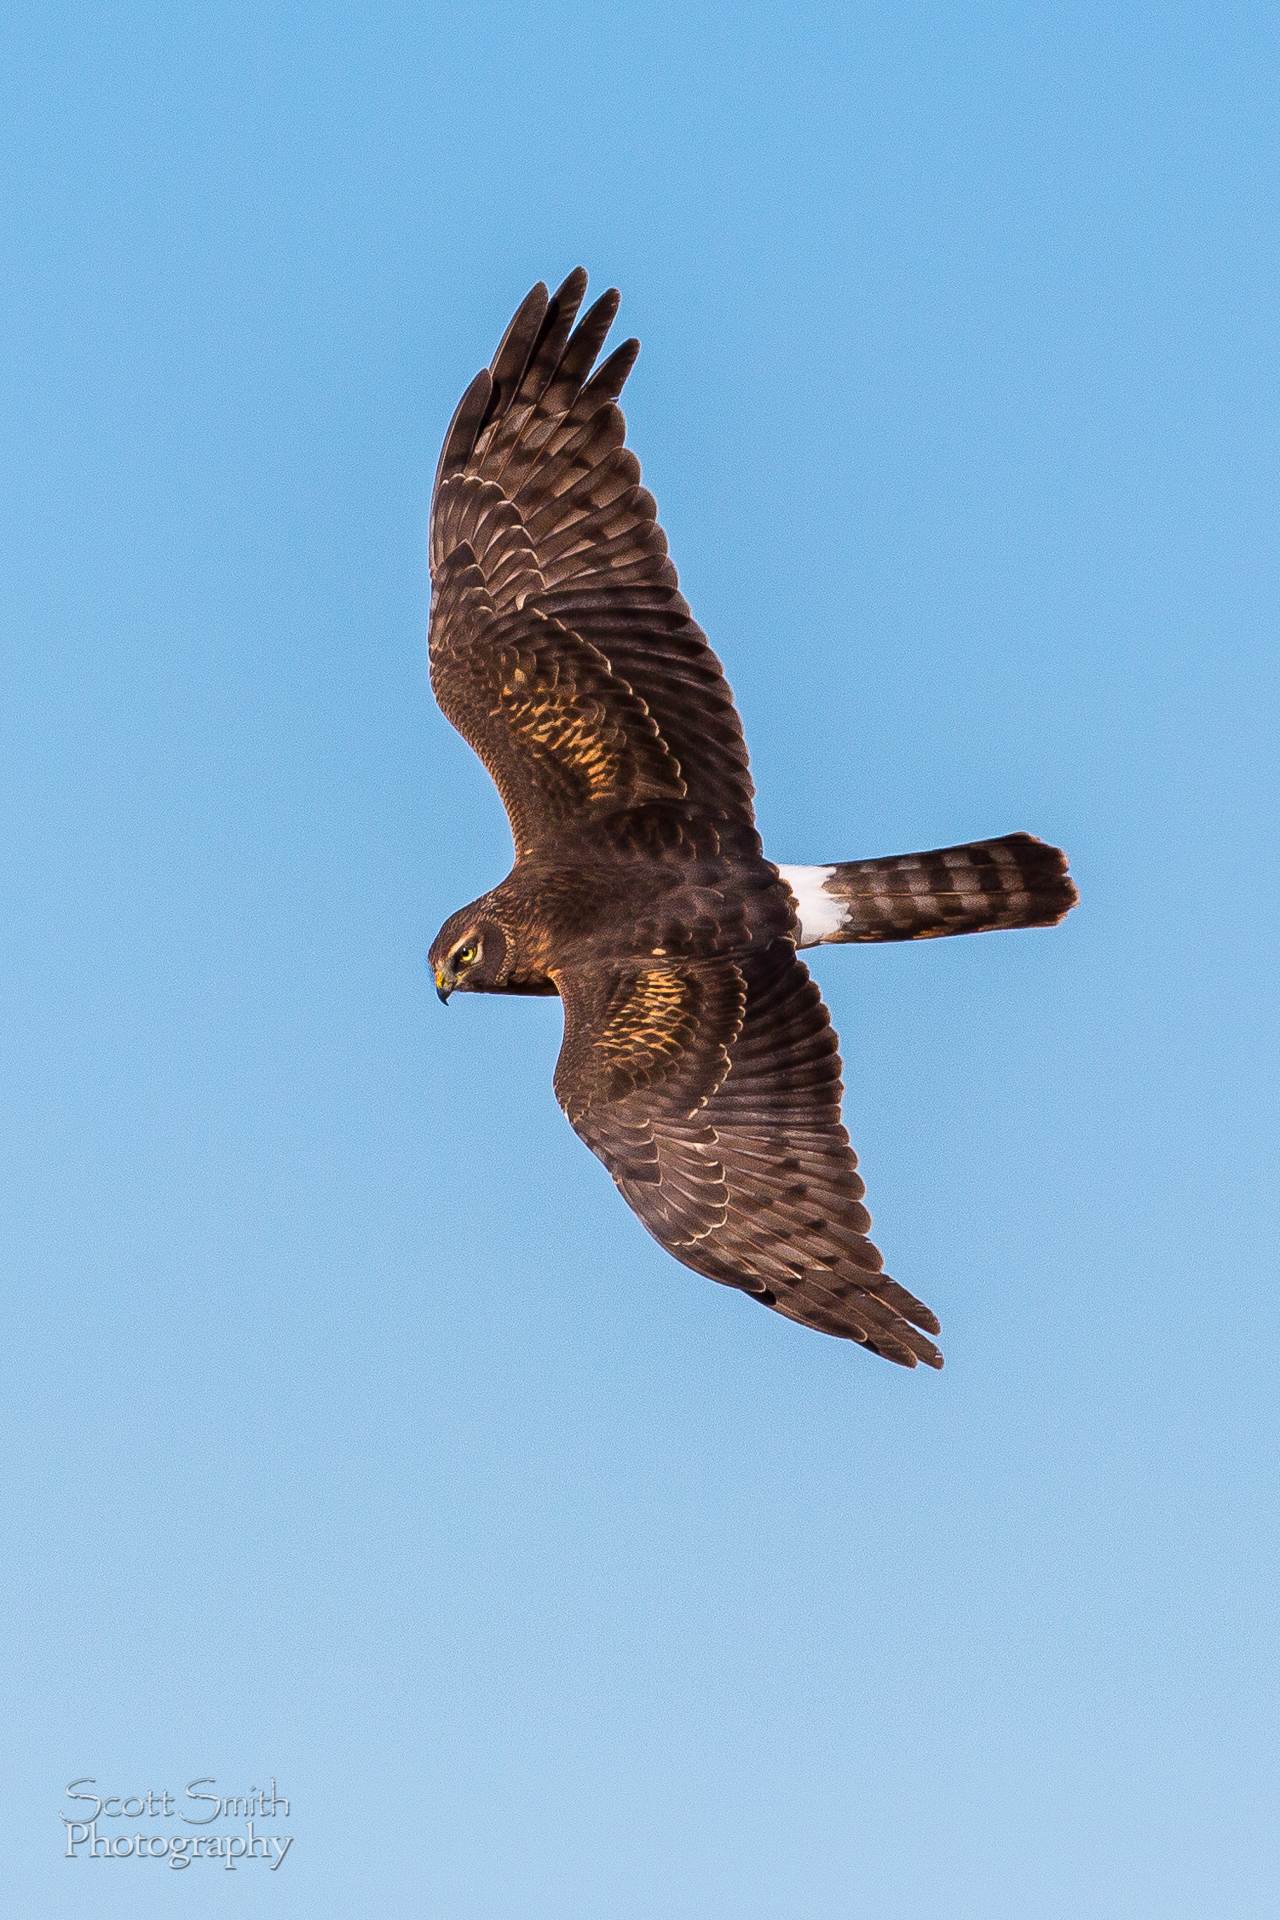 Marsh Hawk II A marsh hawk soaring over the grasslands at the Rocky Mountain Arsenal Wildlife Refuge. by Scott Smith Photos